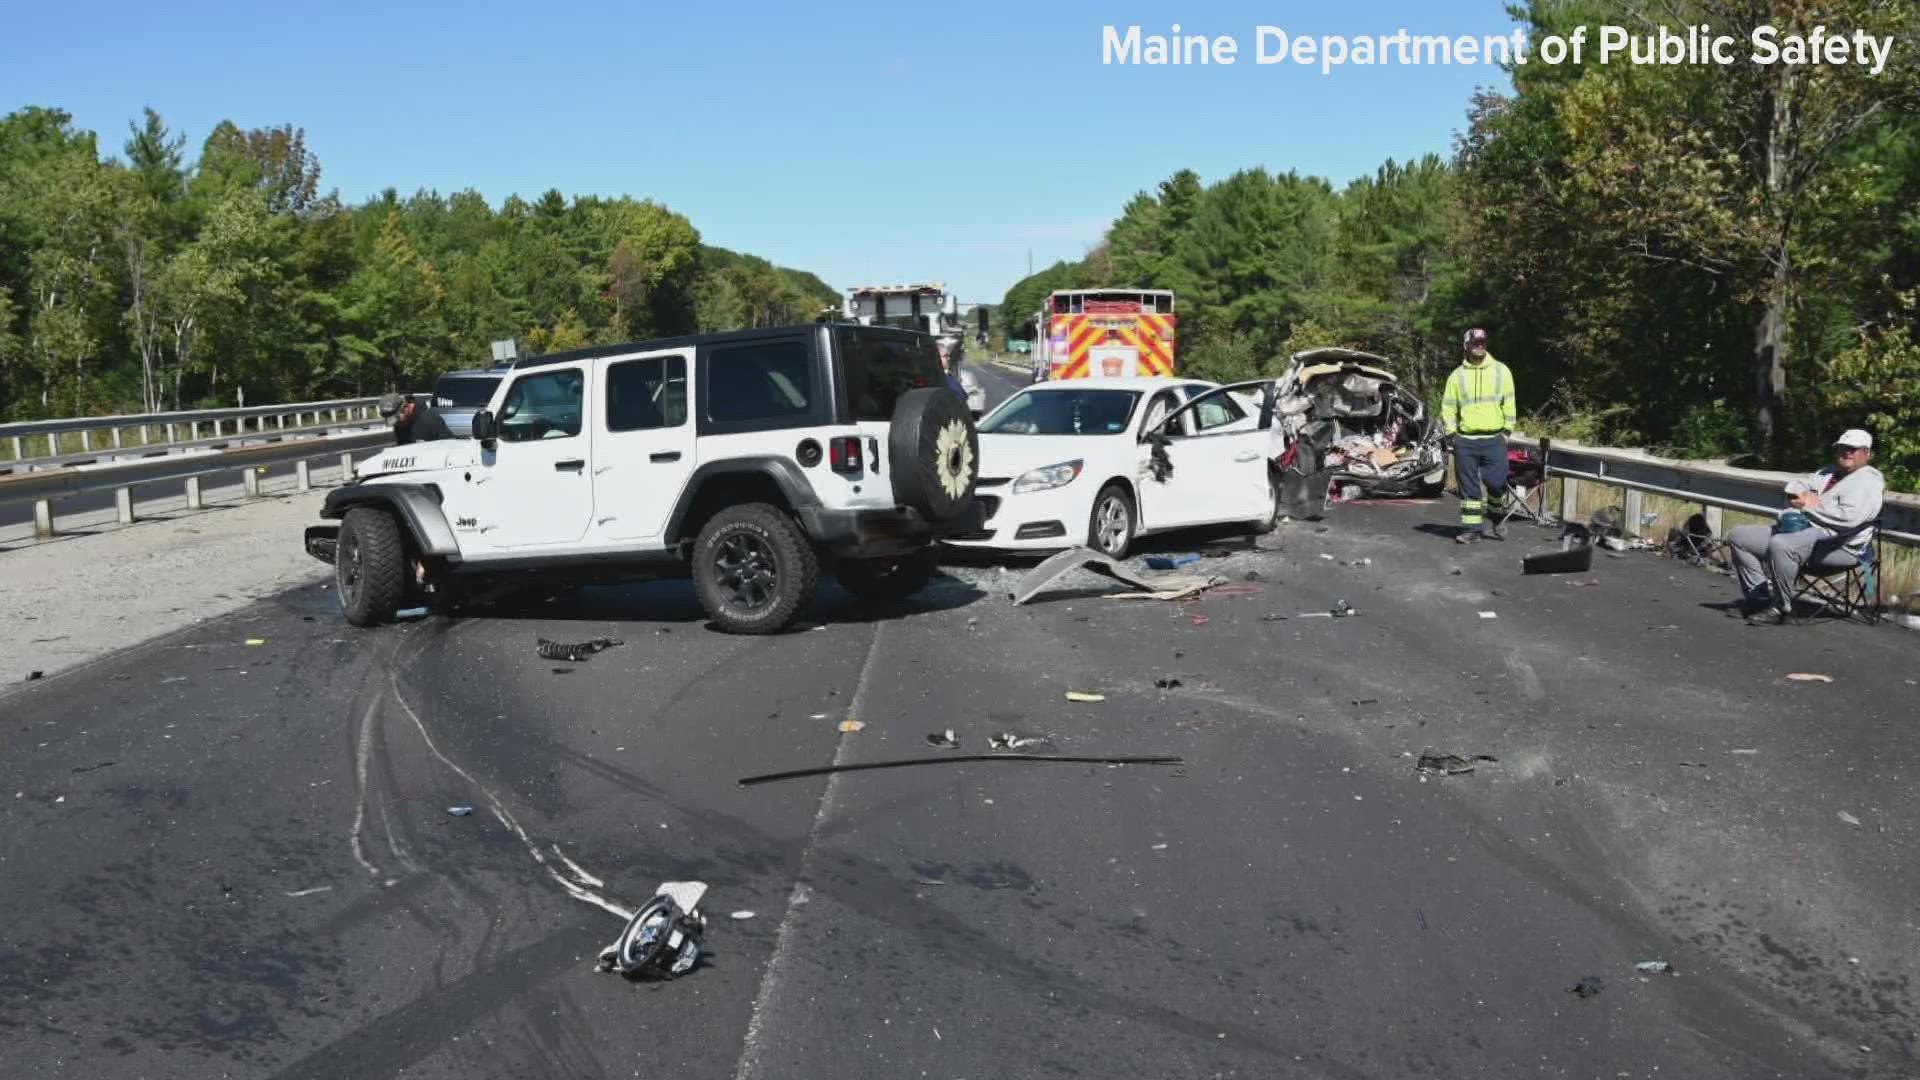 The man, 53, of Stonington, Maine, was pronounced dead at the scene Saturday after his vehicle was rear-ended and pinned between two other vehicles.